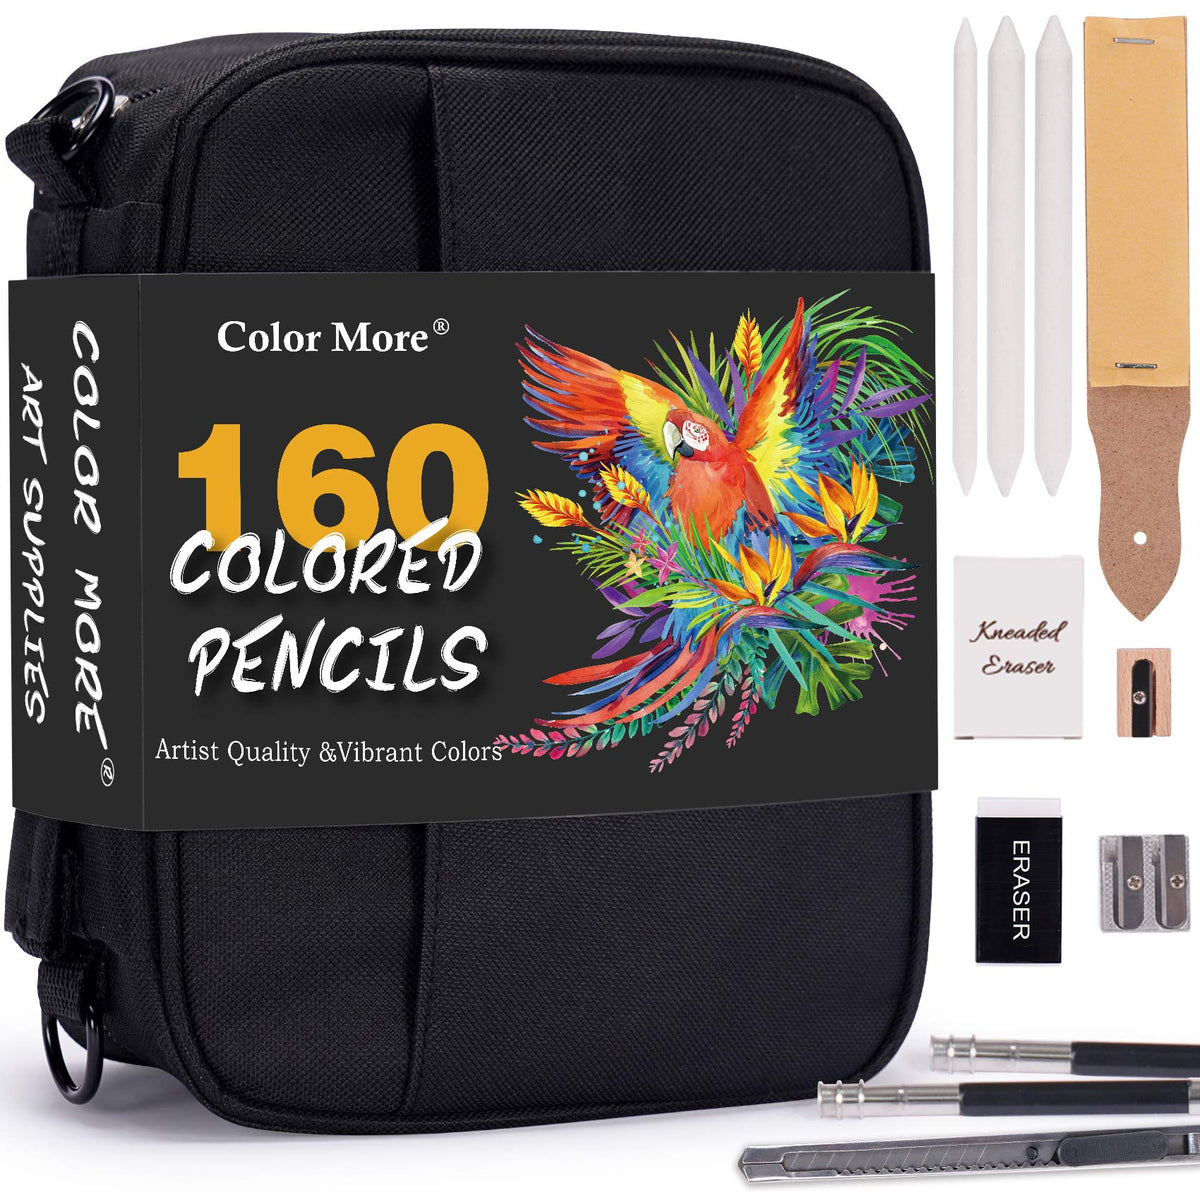 12pcs/set Colored Pencils for Adult Coloring, Drawing Pencils with Soft  Oil-Based Cores, Professional Art Supplies for Artists, Vibrant Pencil Set  in Tin Box for Beginners and Pro.